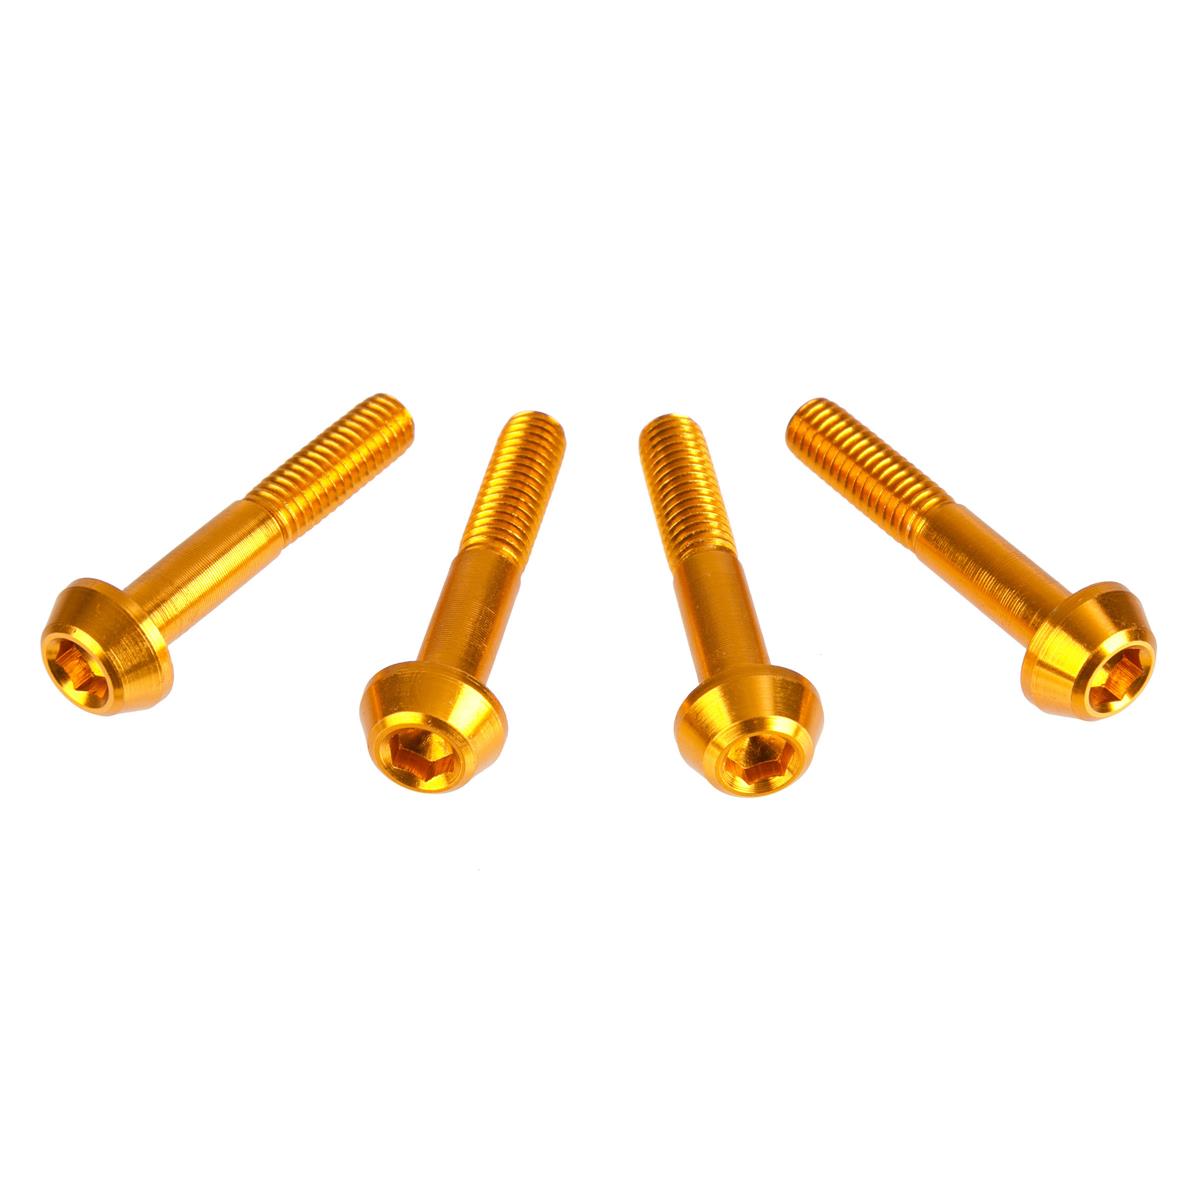 DRC Inner Hex Bolts  M6 x 35 mm, Gold, 4-Pack